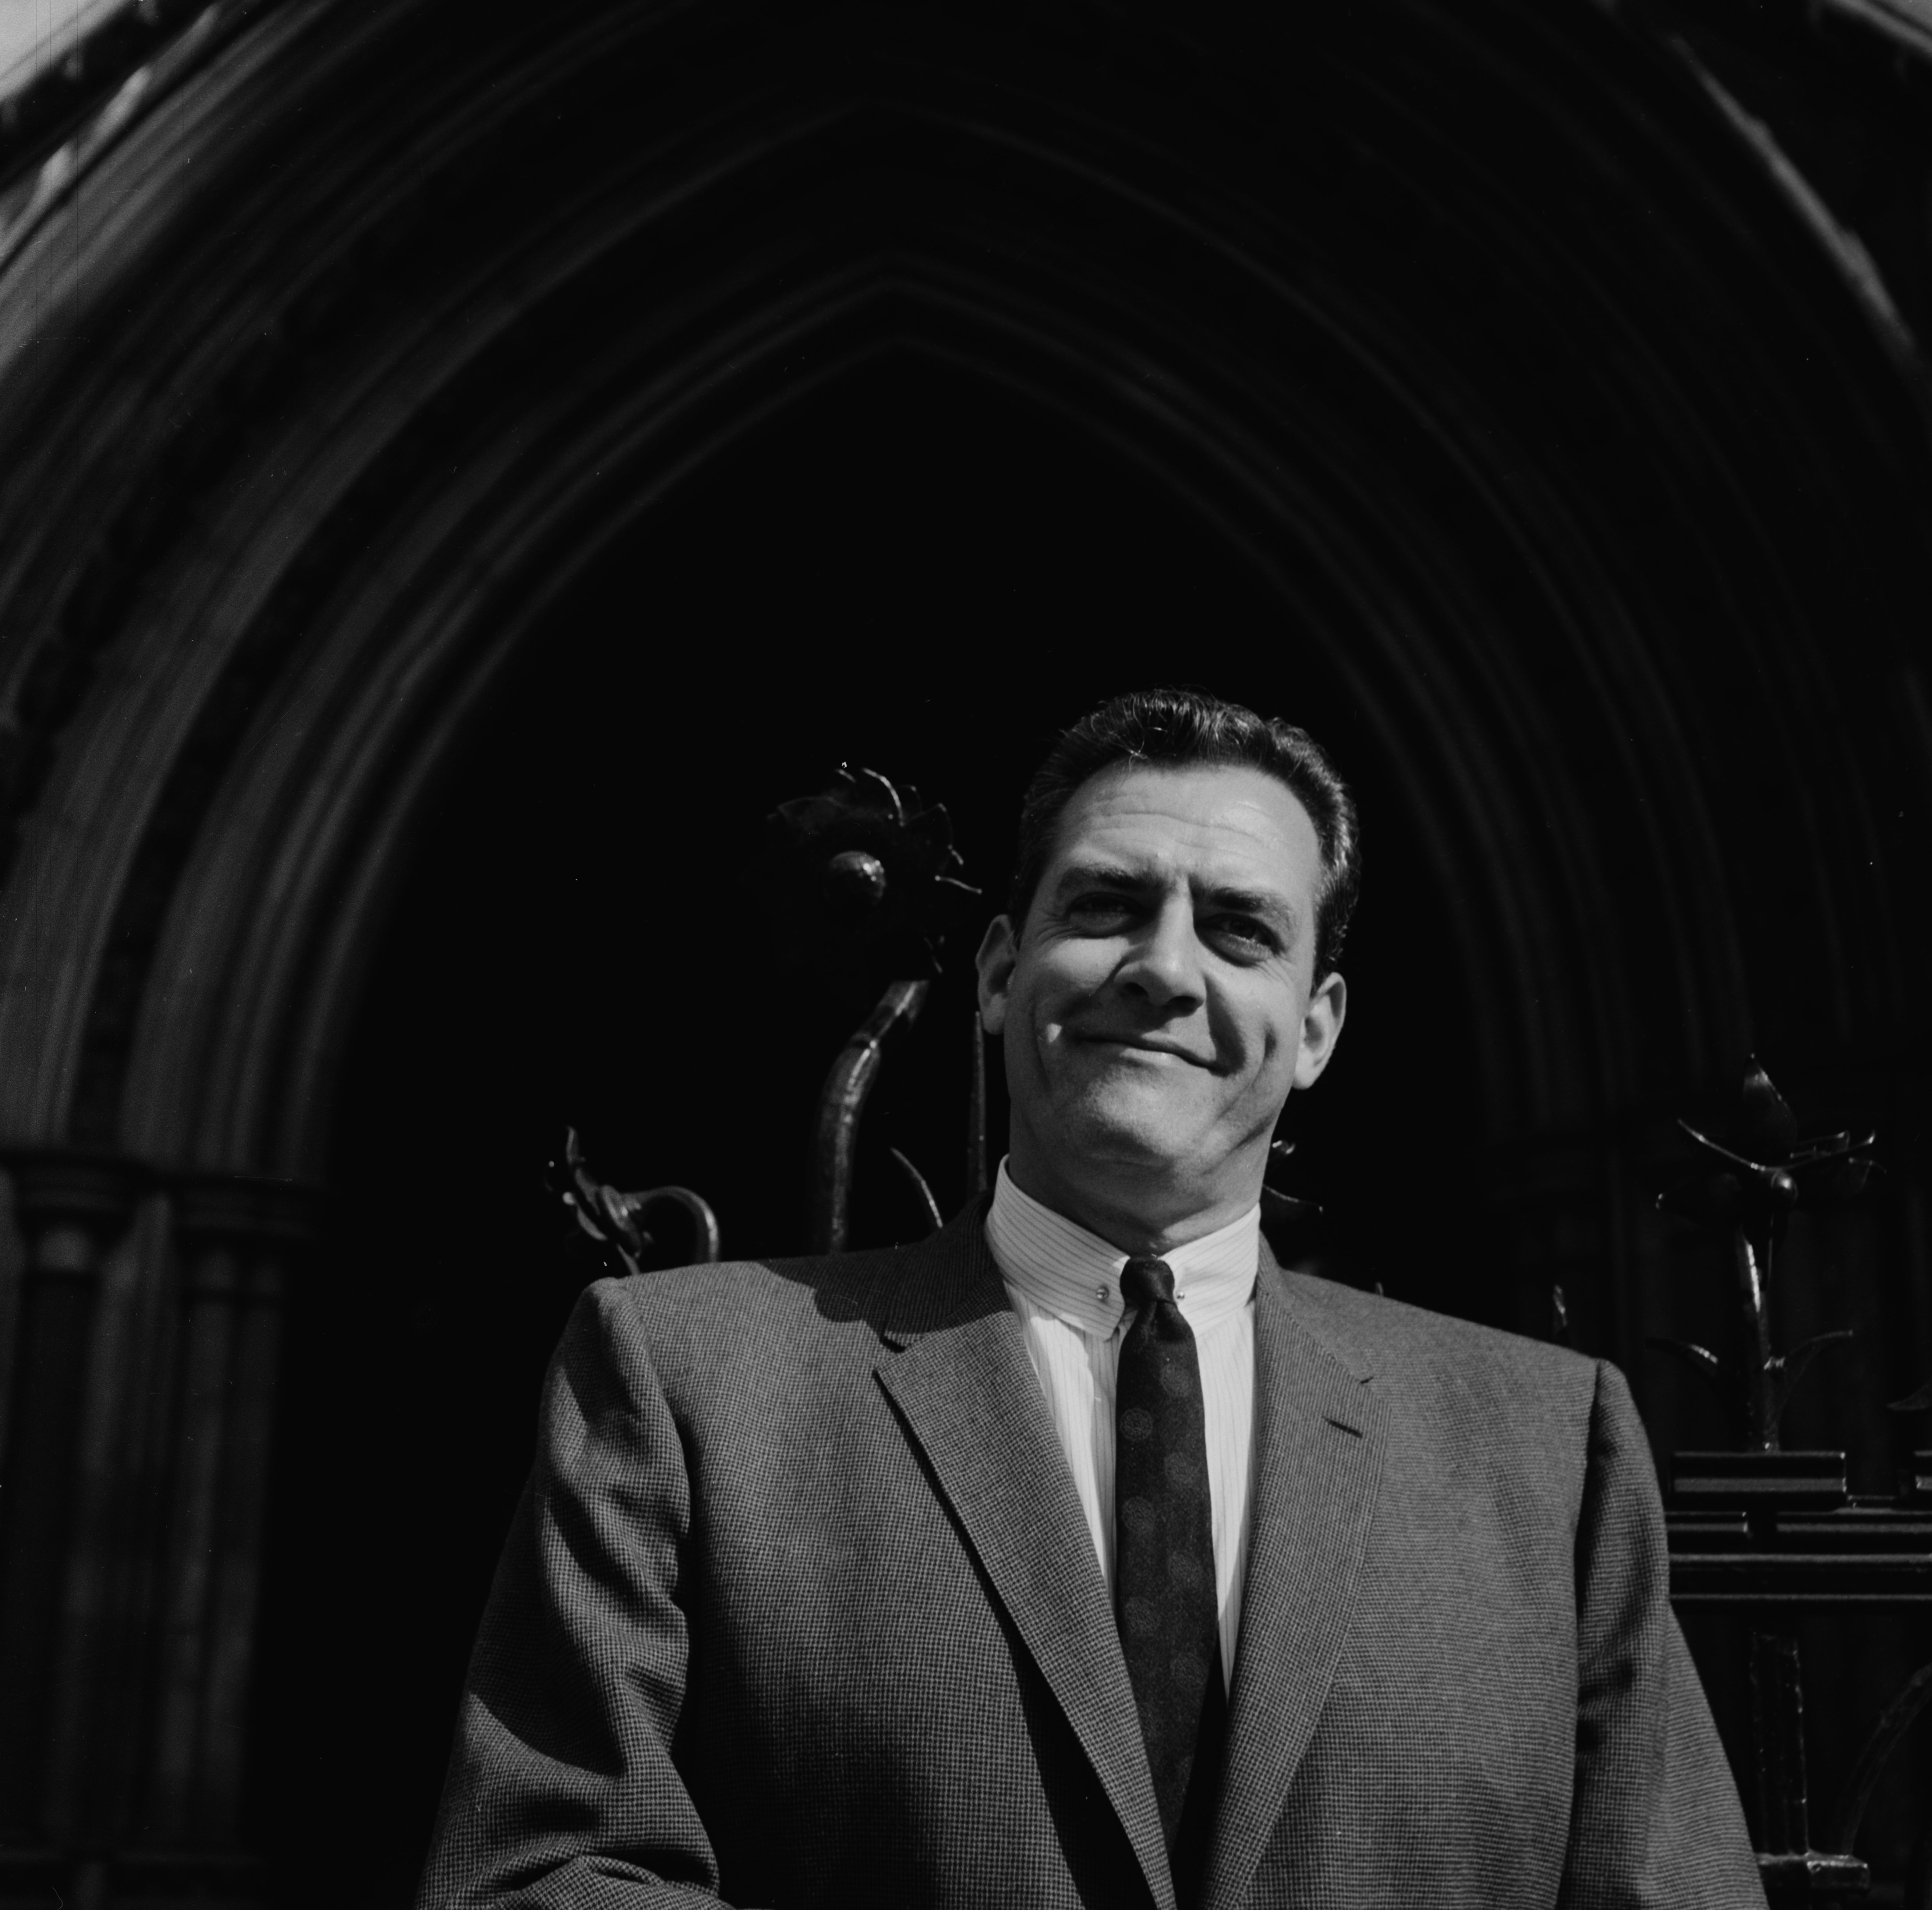 Raymond Burr pictured outside the Royal Courts of Justice during a promotional tour for "Perry Mason," London, 1961. / Source: Getty Images